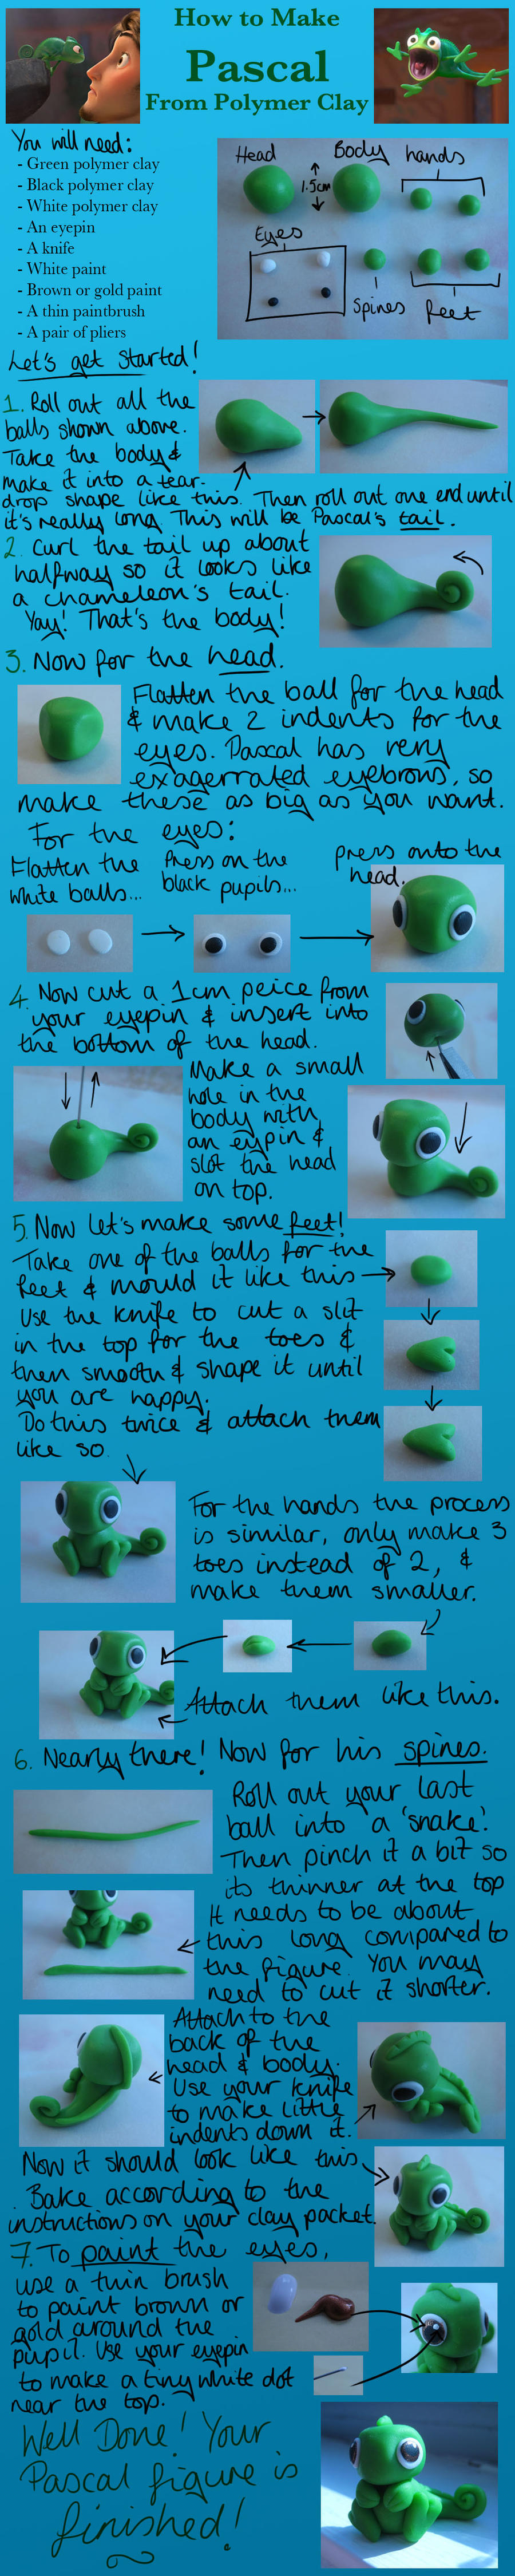 tangled__s_pascal_clay_tutorial_by_lightningmcturner-d4733ci.jpg